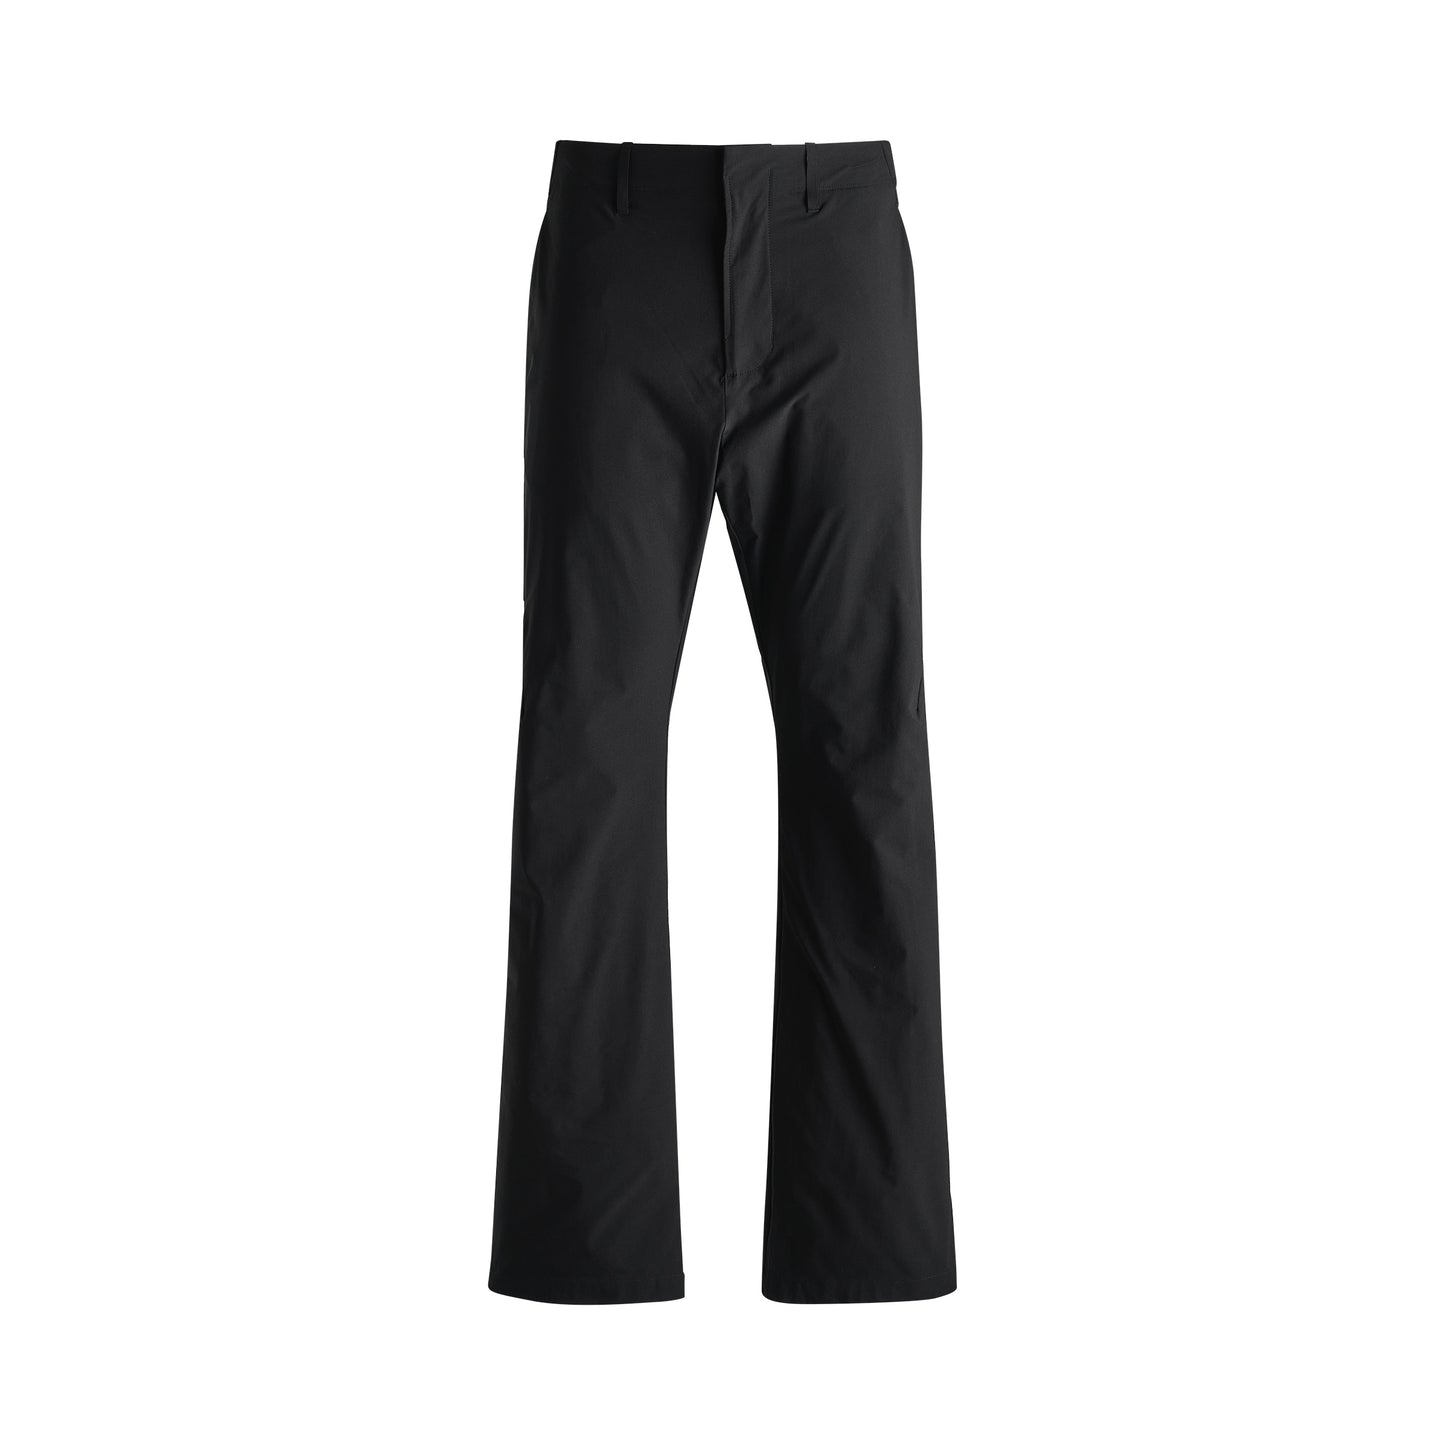 6.0 Technical Pants (Right) in Black